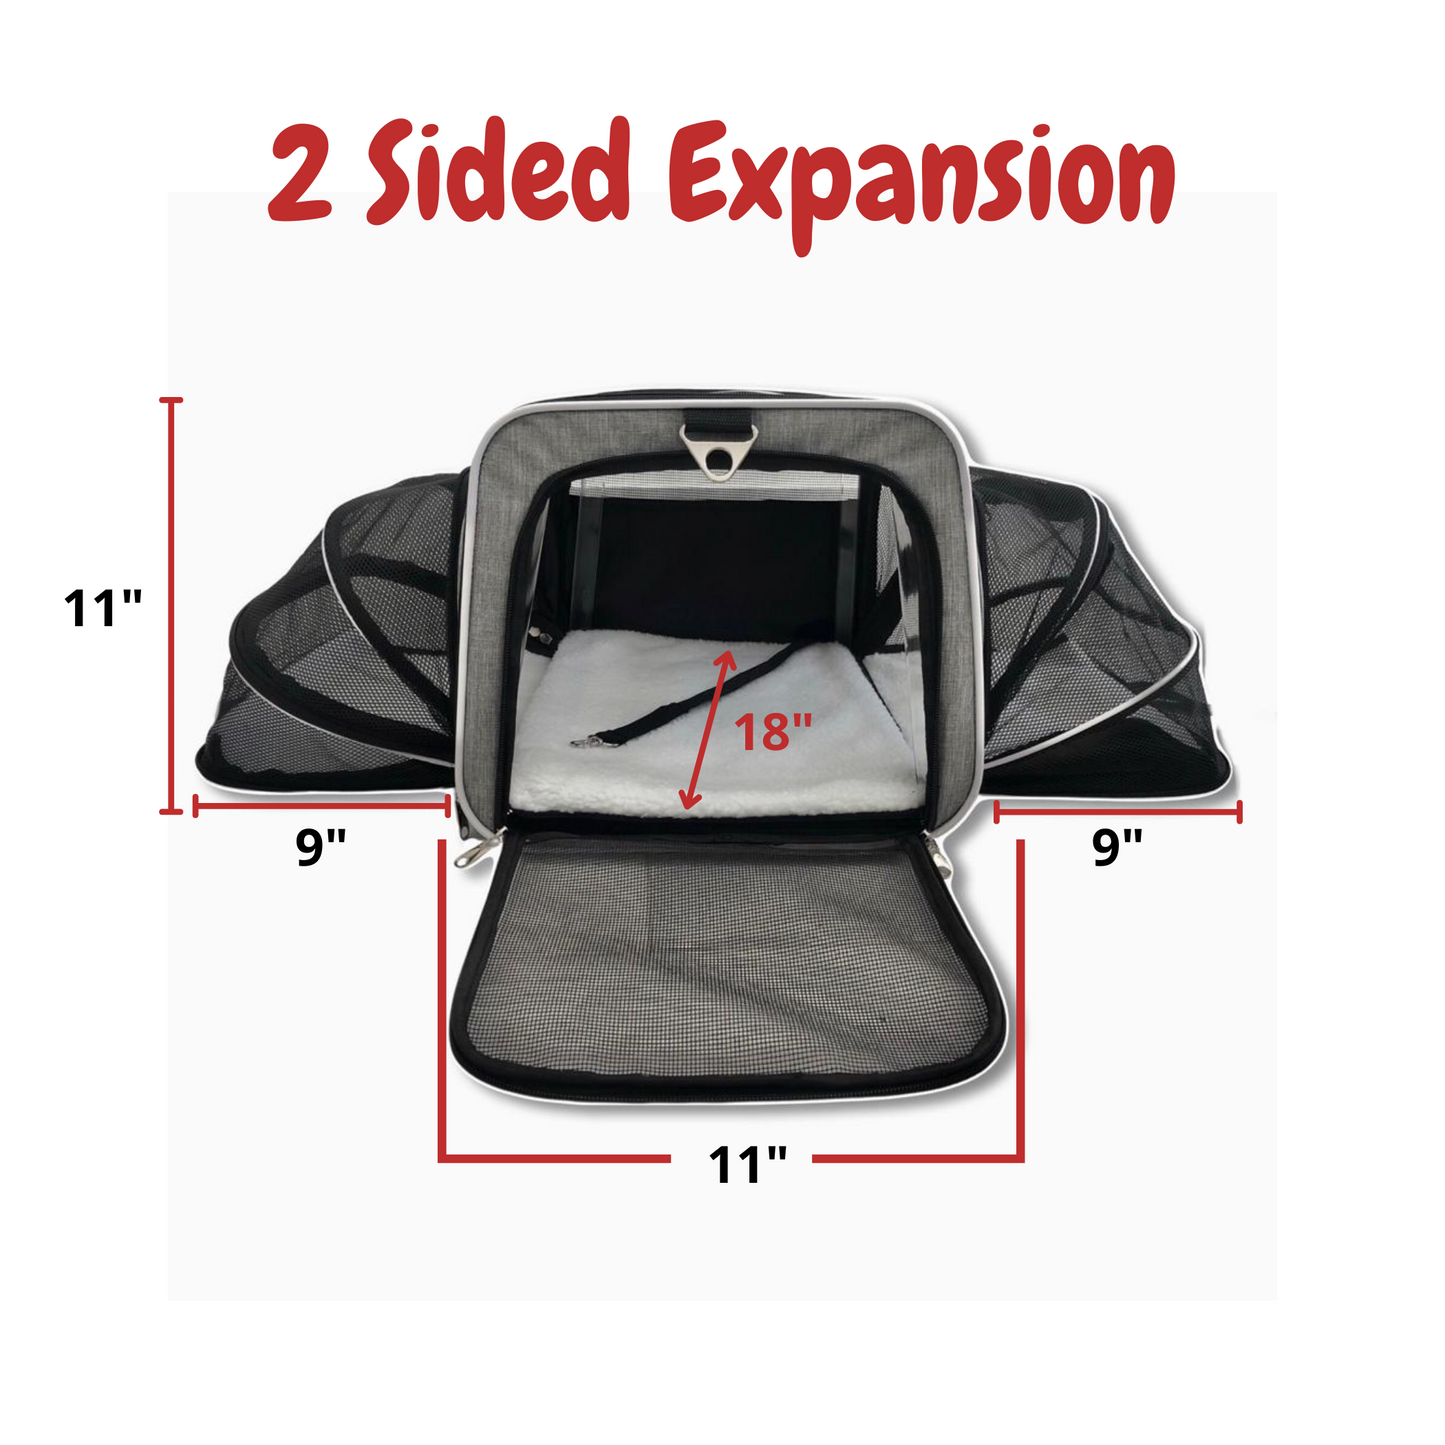 Ruff Life 101 Airline Approved Expandable Premium Pet Carrier on Wheels- Two Sided Expandable Rolling Carrier- Designed for Dogs & Cats- Extra